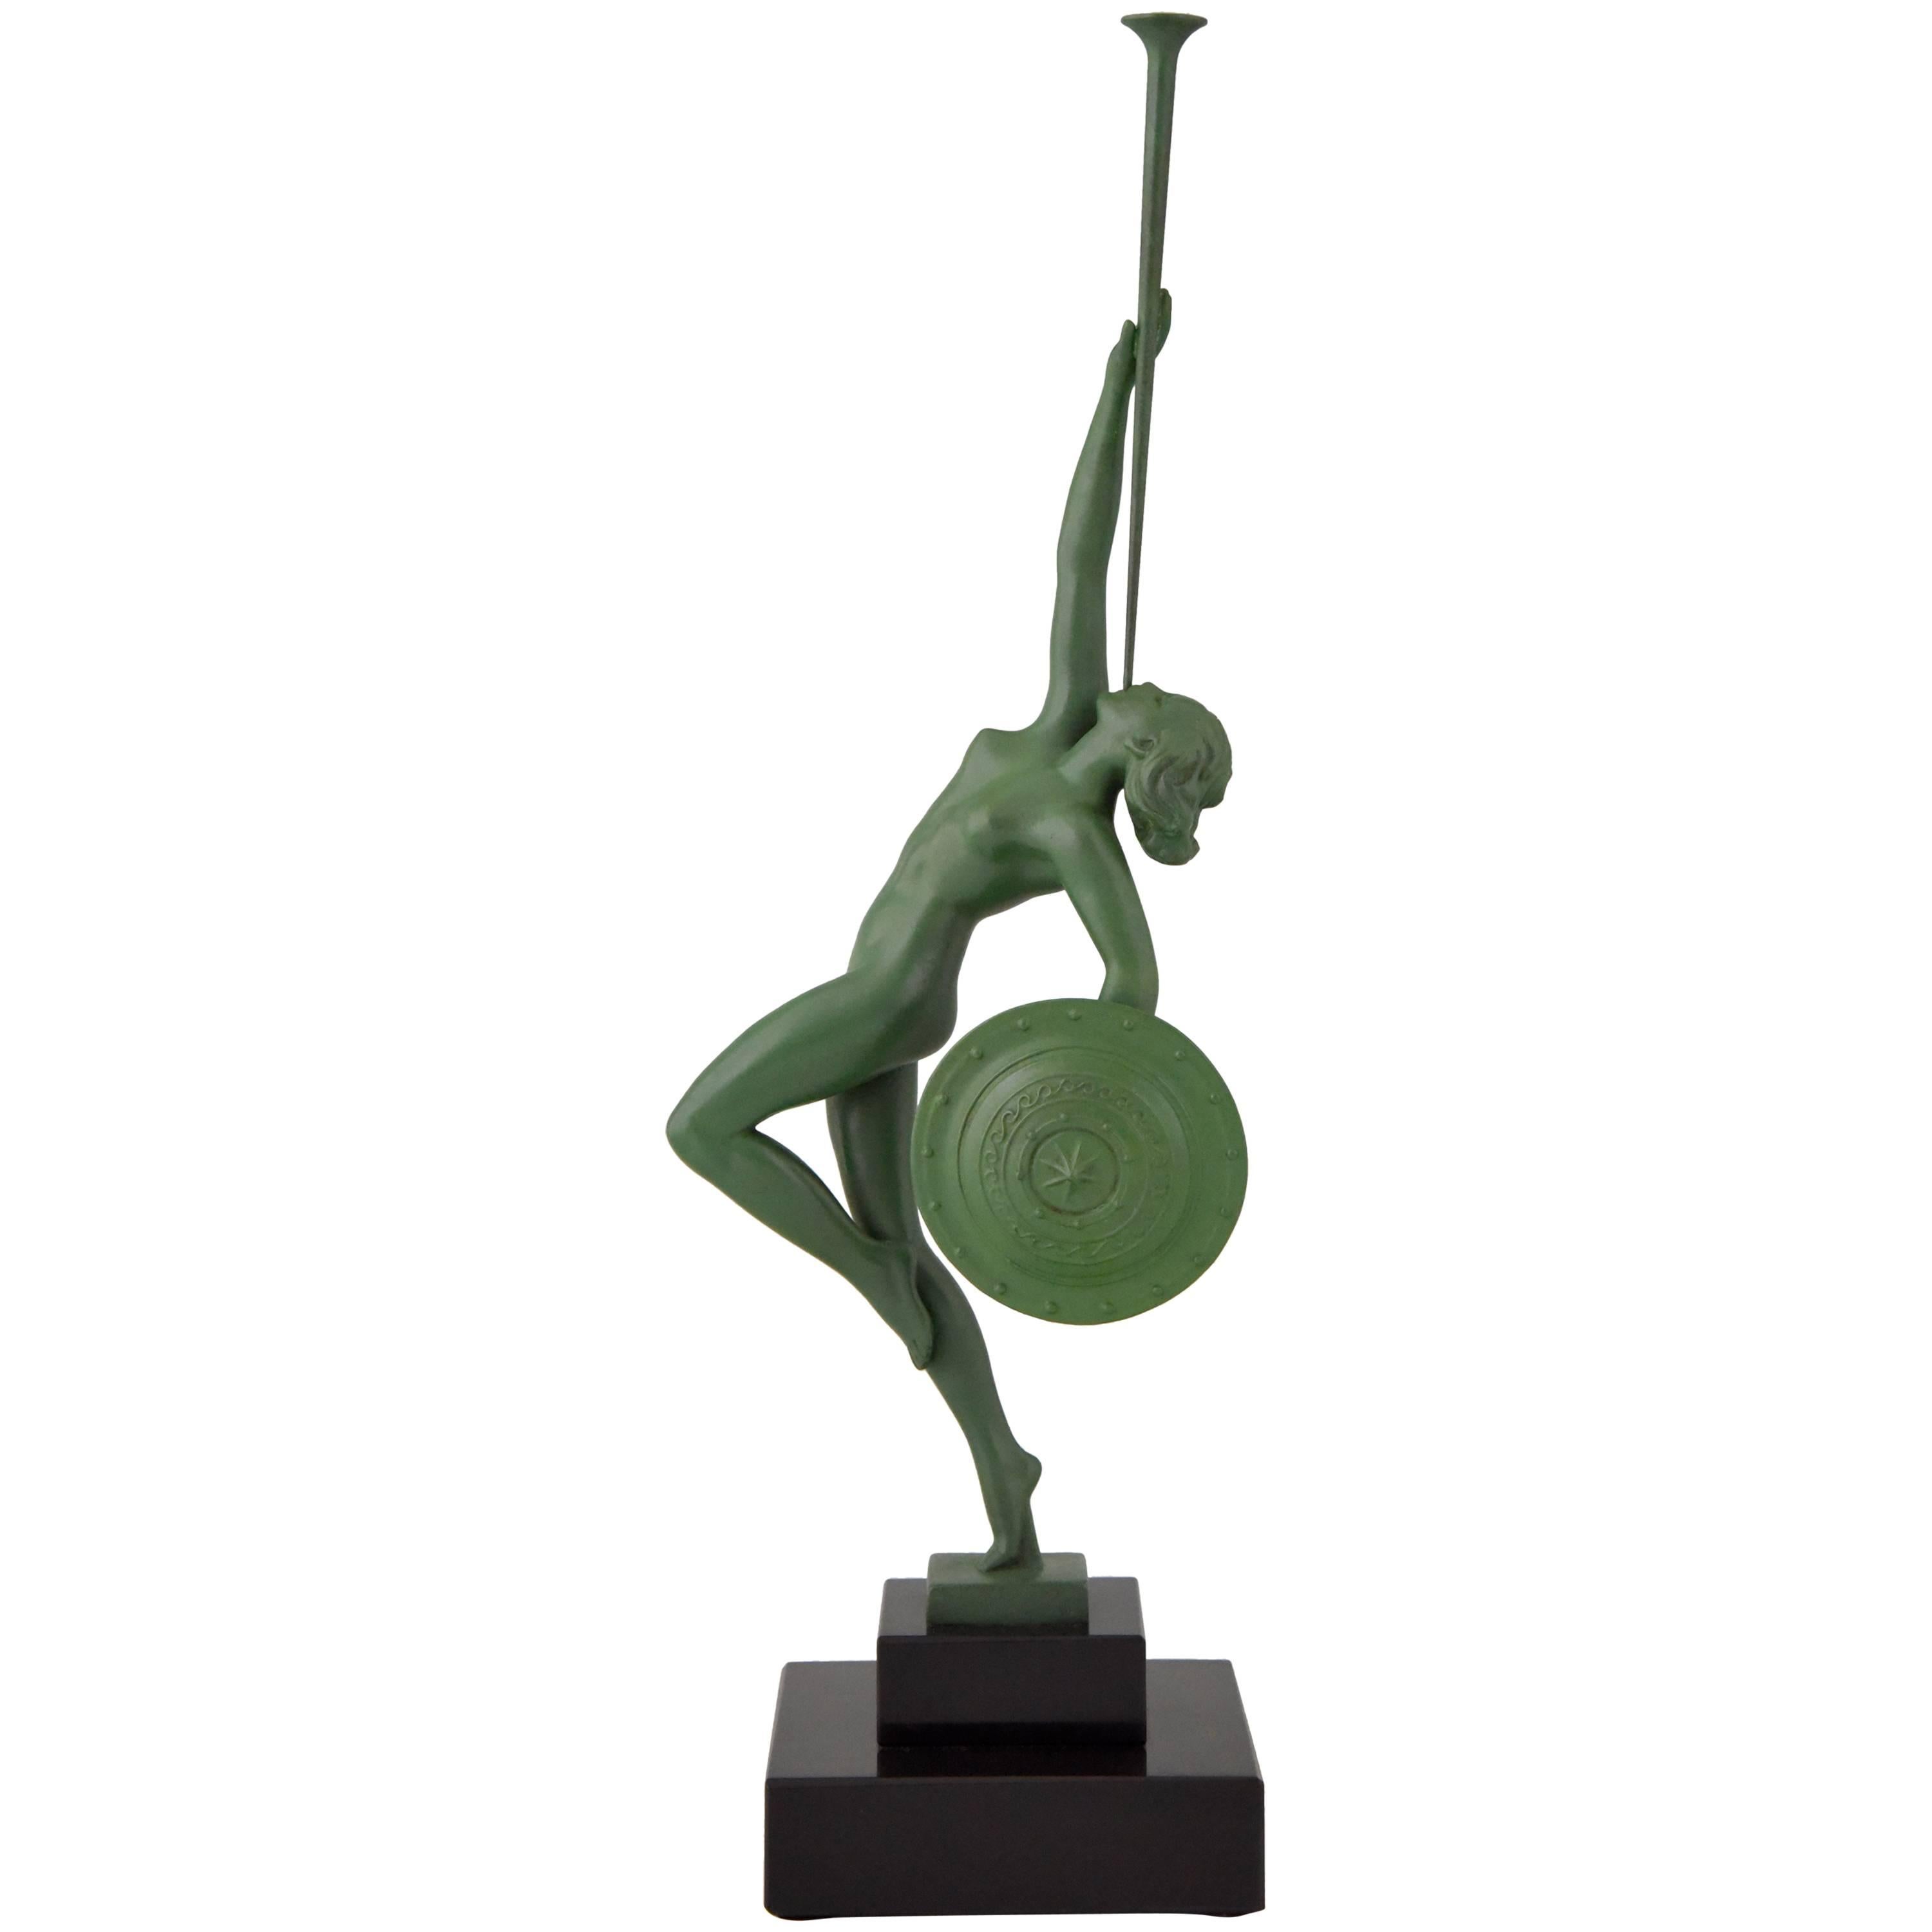 French Art Deco Sculpture Nude with Trumpet by Guerbe on Marble Base, 1930